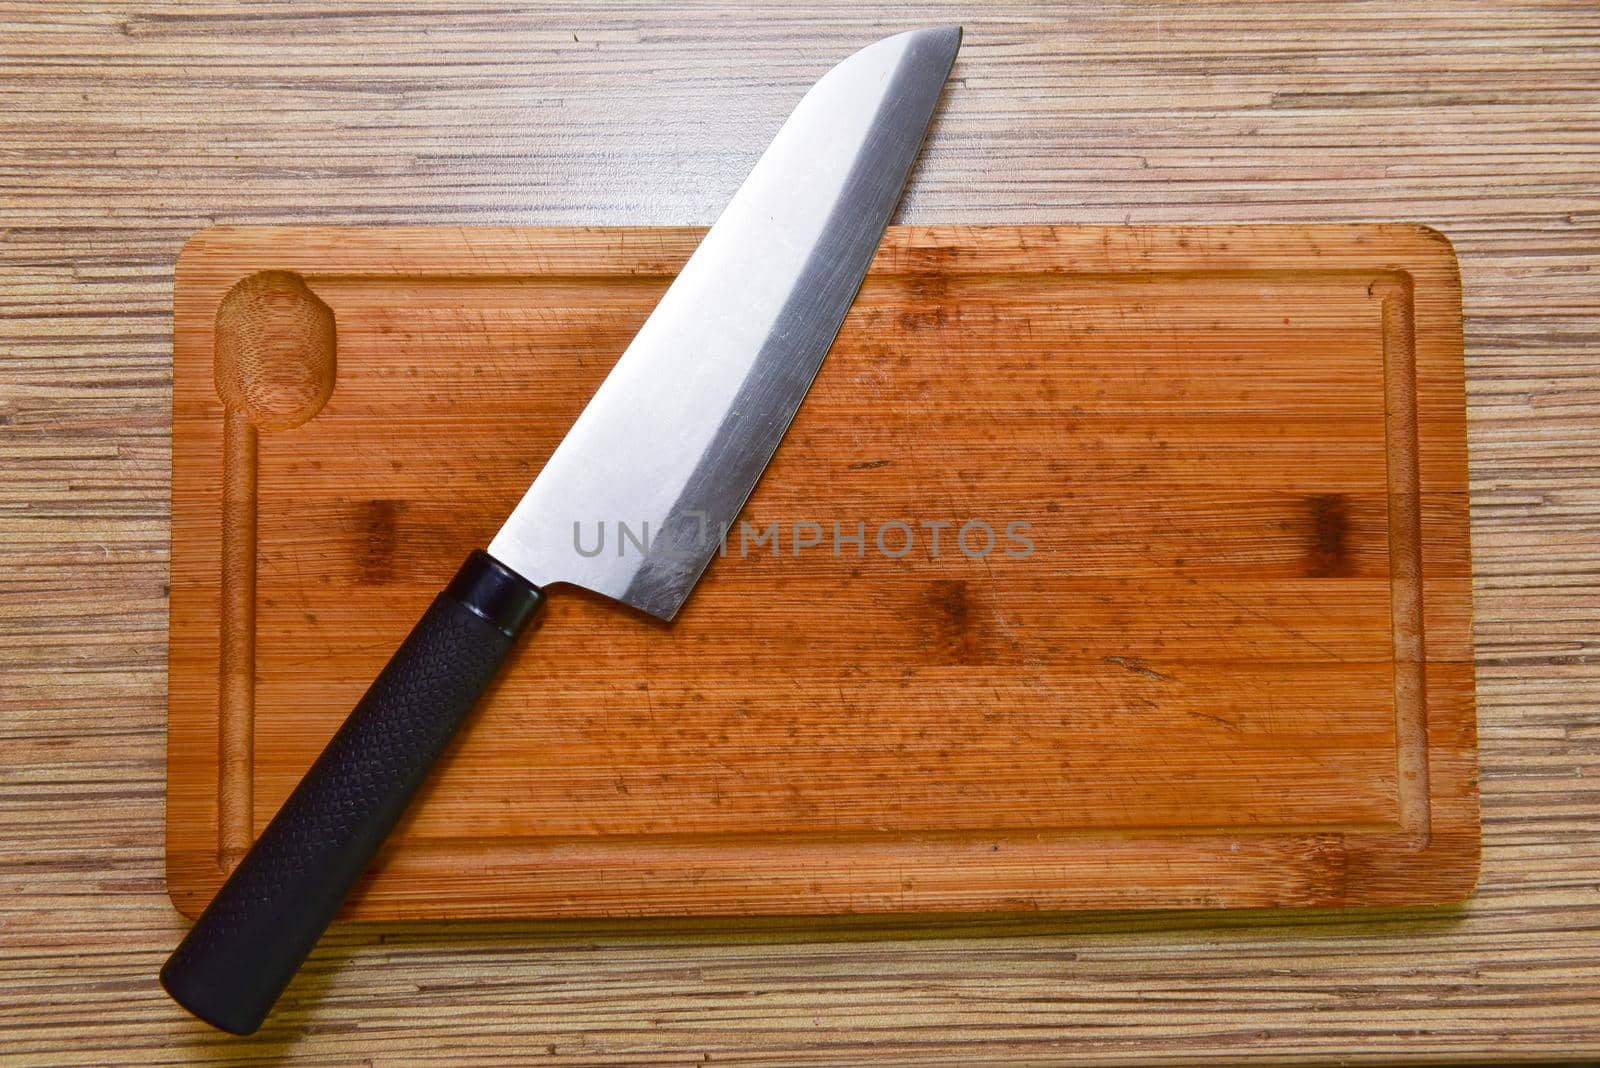 Cutting board and a kitchen knife on wooden background. Top view.